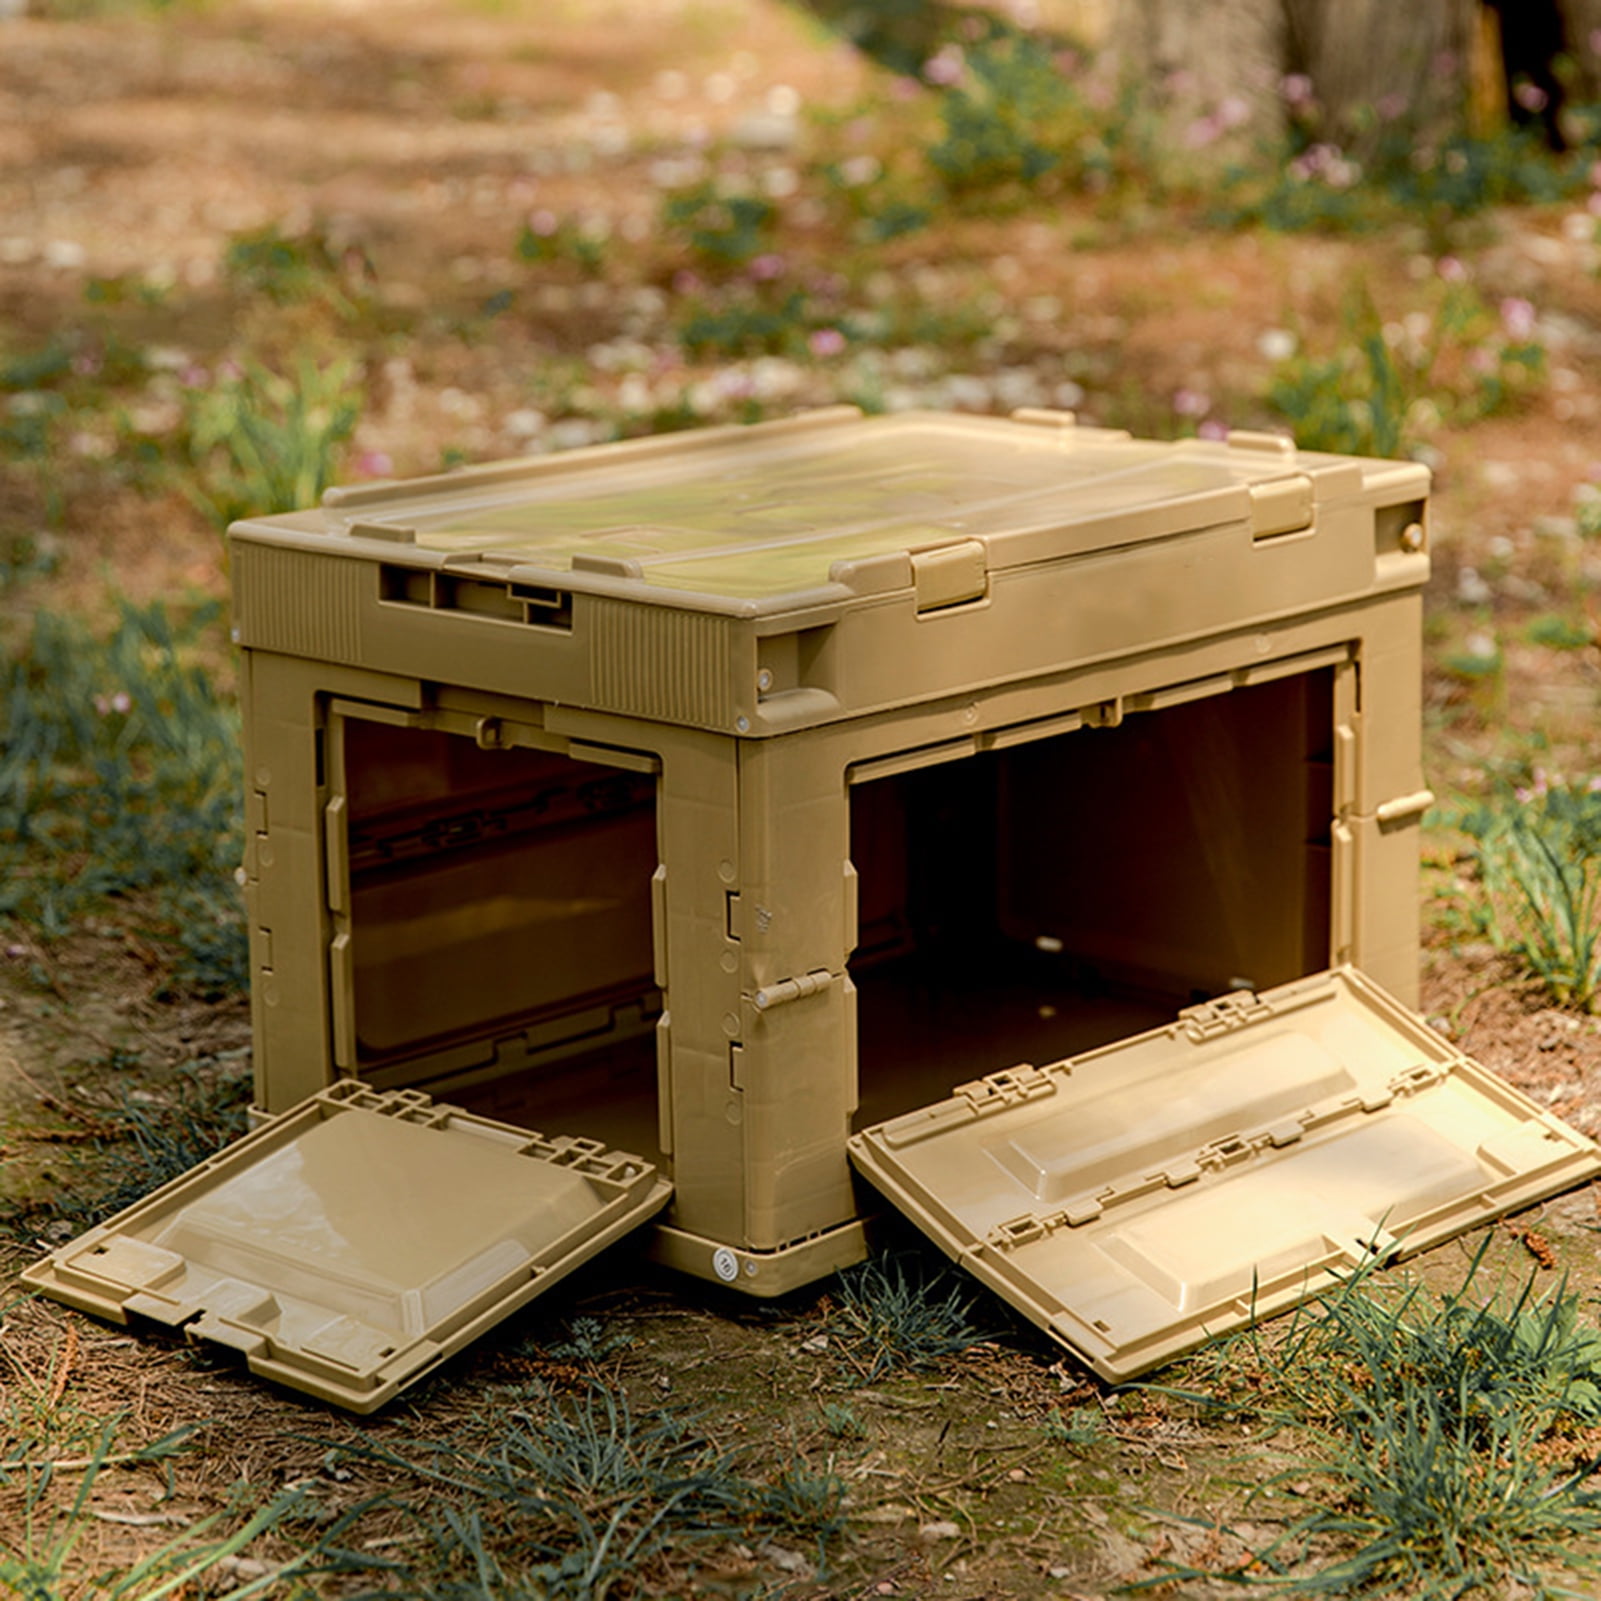 The foldable outdoor camping storage box has a large capacity of 48L, the  foldable storage box equipped with a wooden cover and rollers can be used